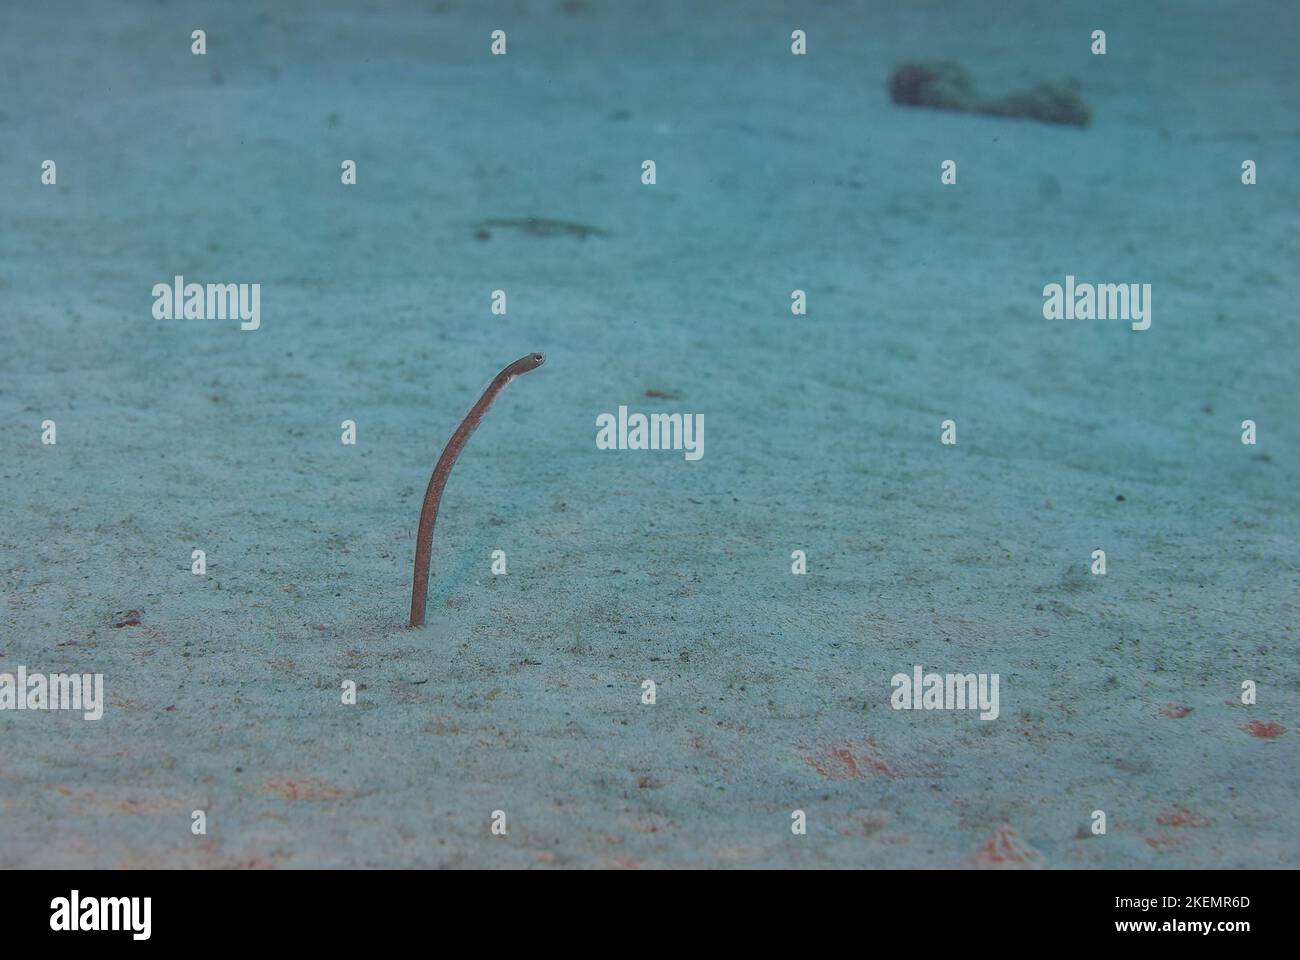 Underwater garden eels sticking their heads out of sand Stock Photo